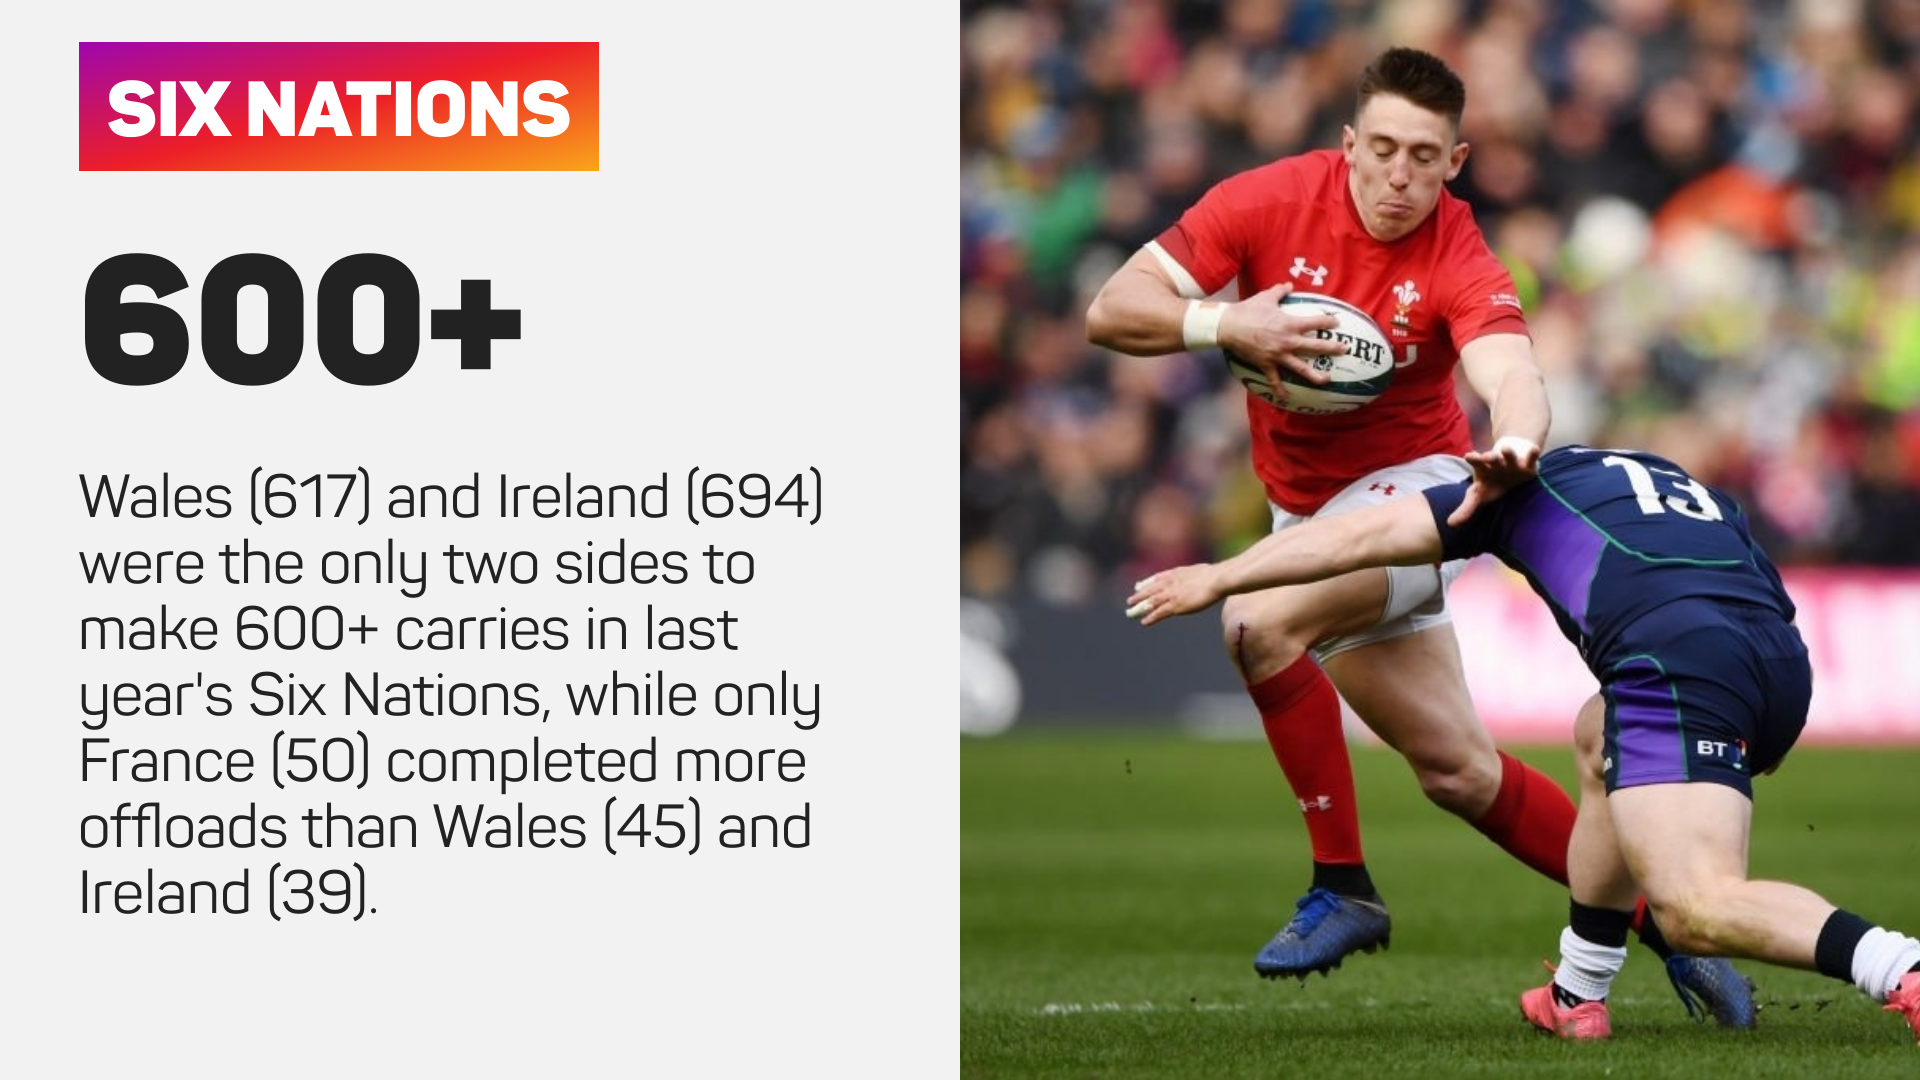 Wales (617) and Ireland (694) were the only two sides to make 600+ carries in last year's Six Nations